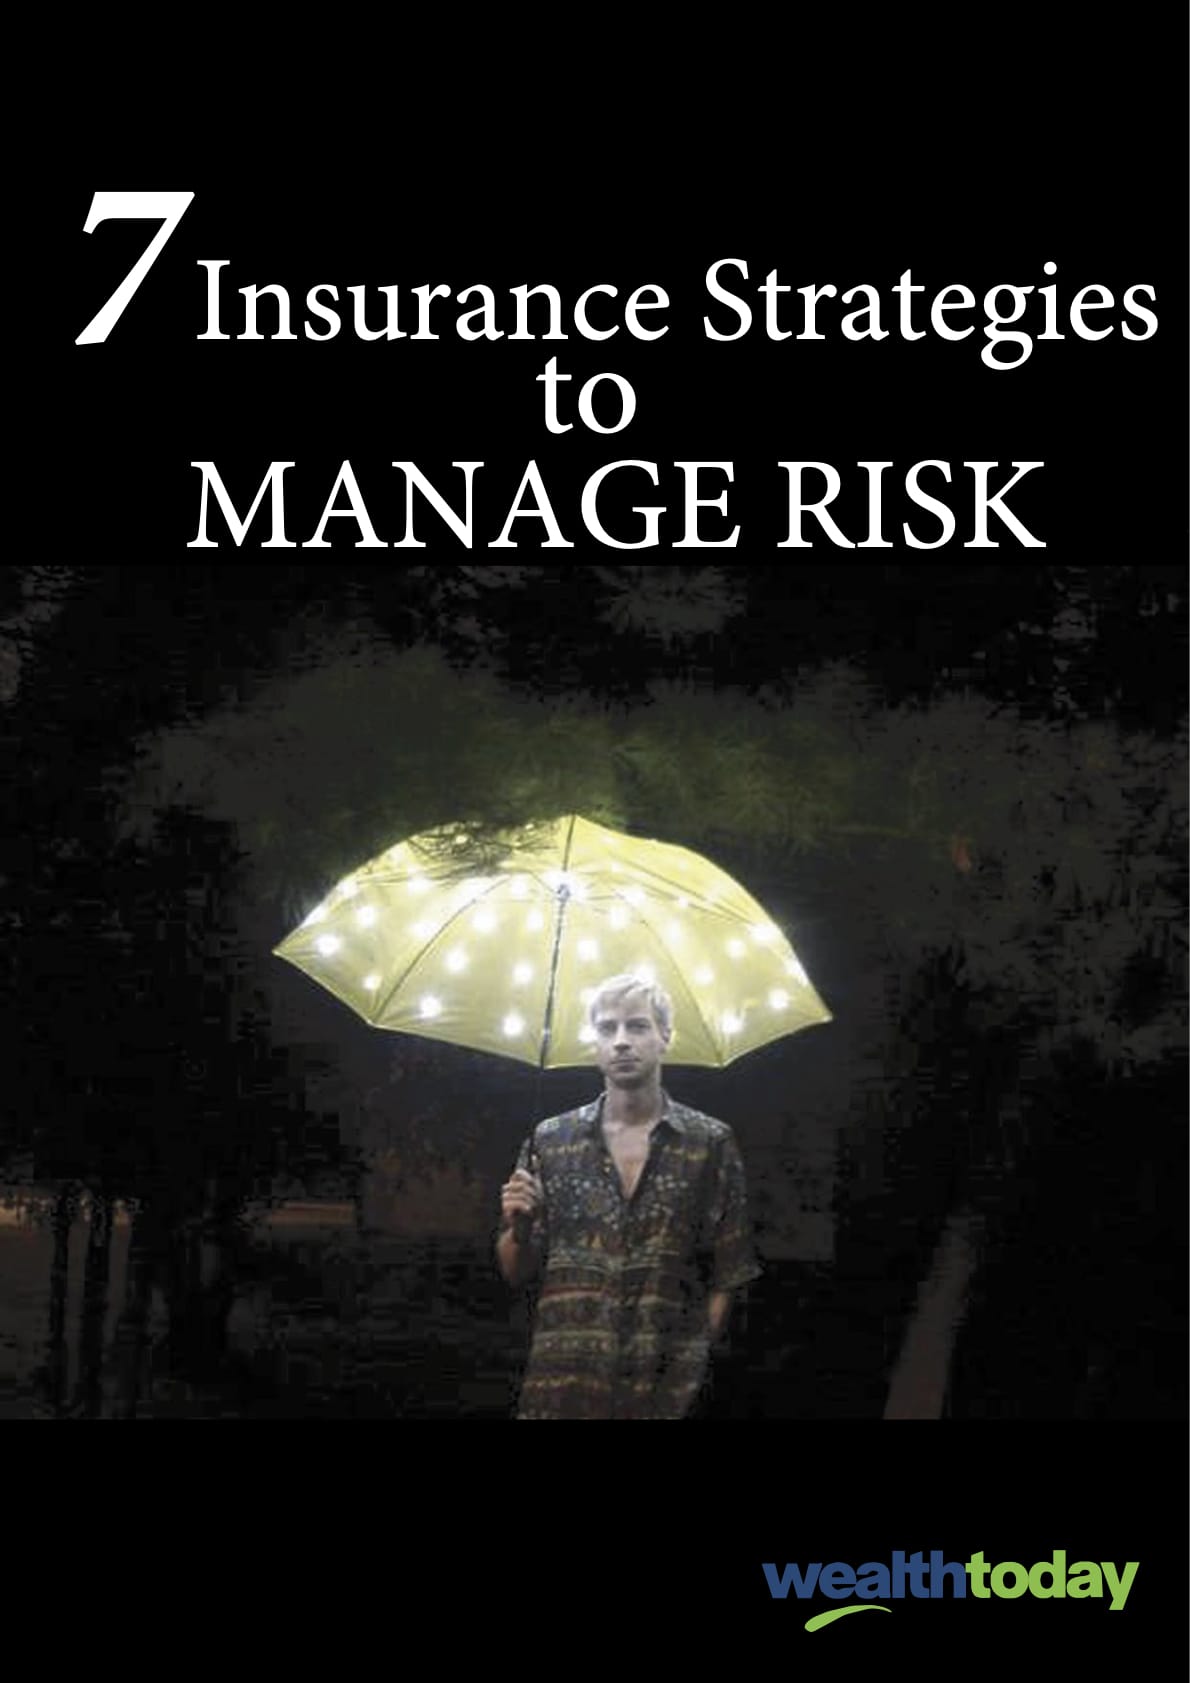 7-Insurance-Strategies-to-Manage-Risk-WT-Form-201810